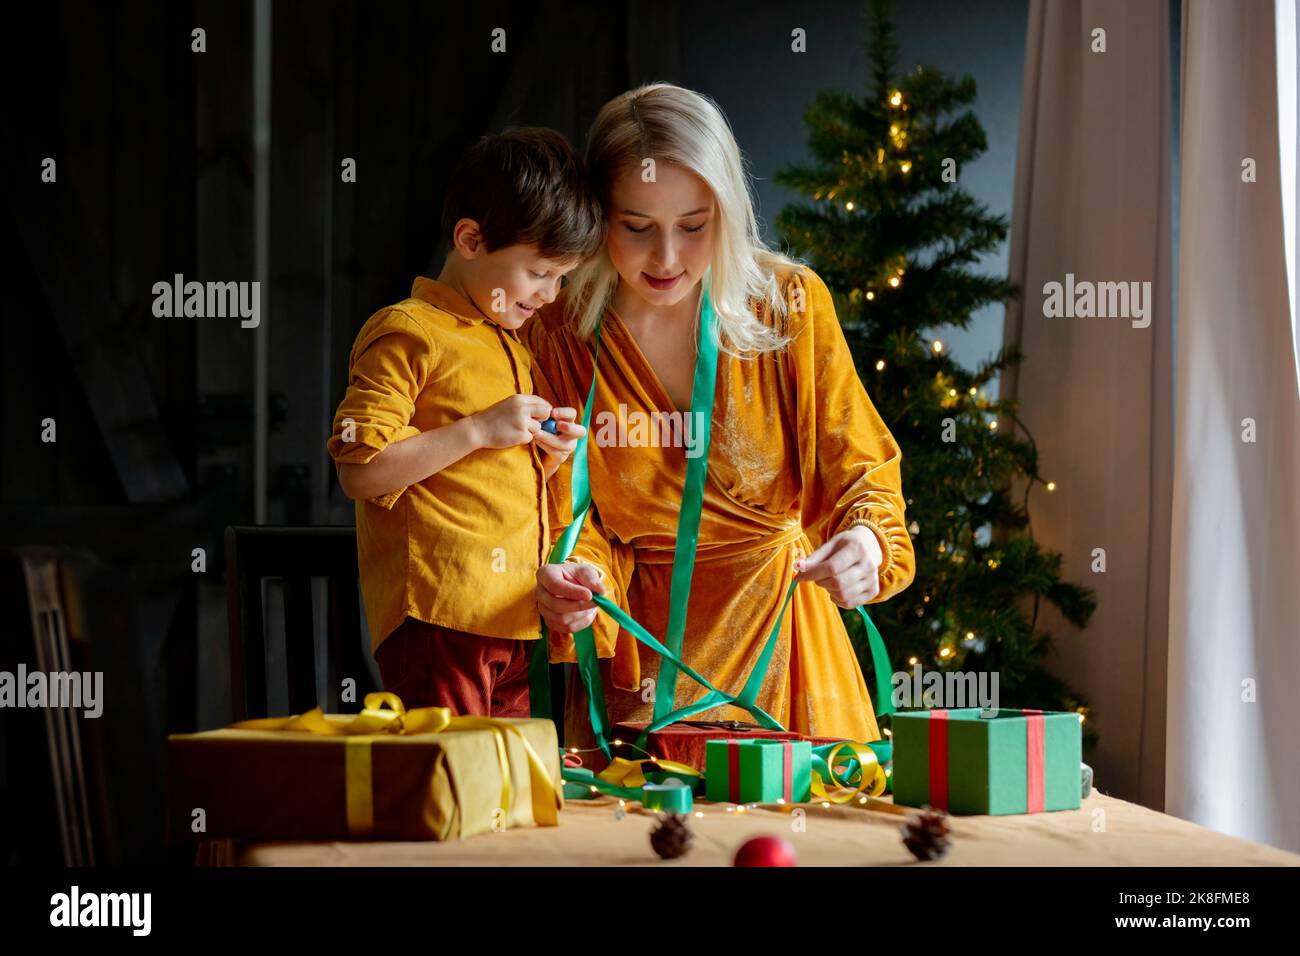 Woman showing son how to tie bow on present Stock Photo